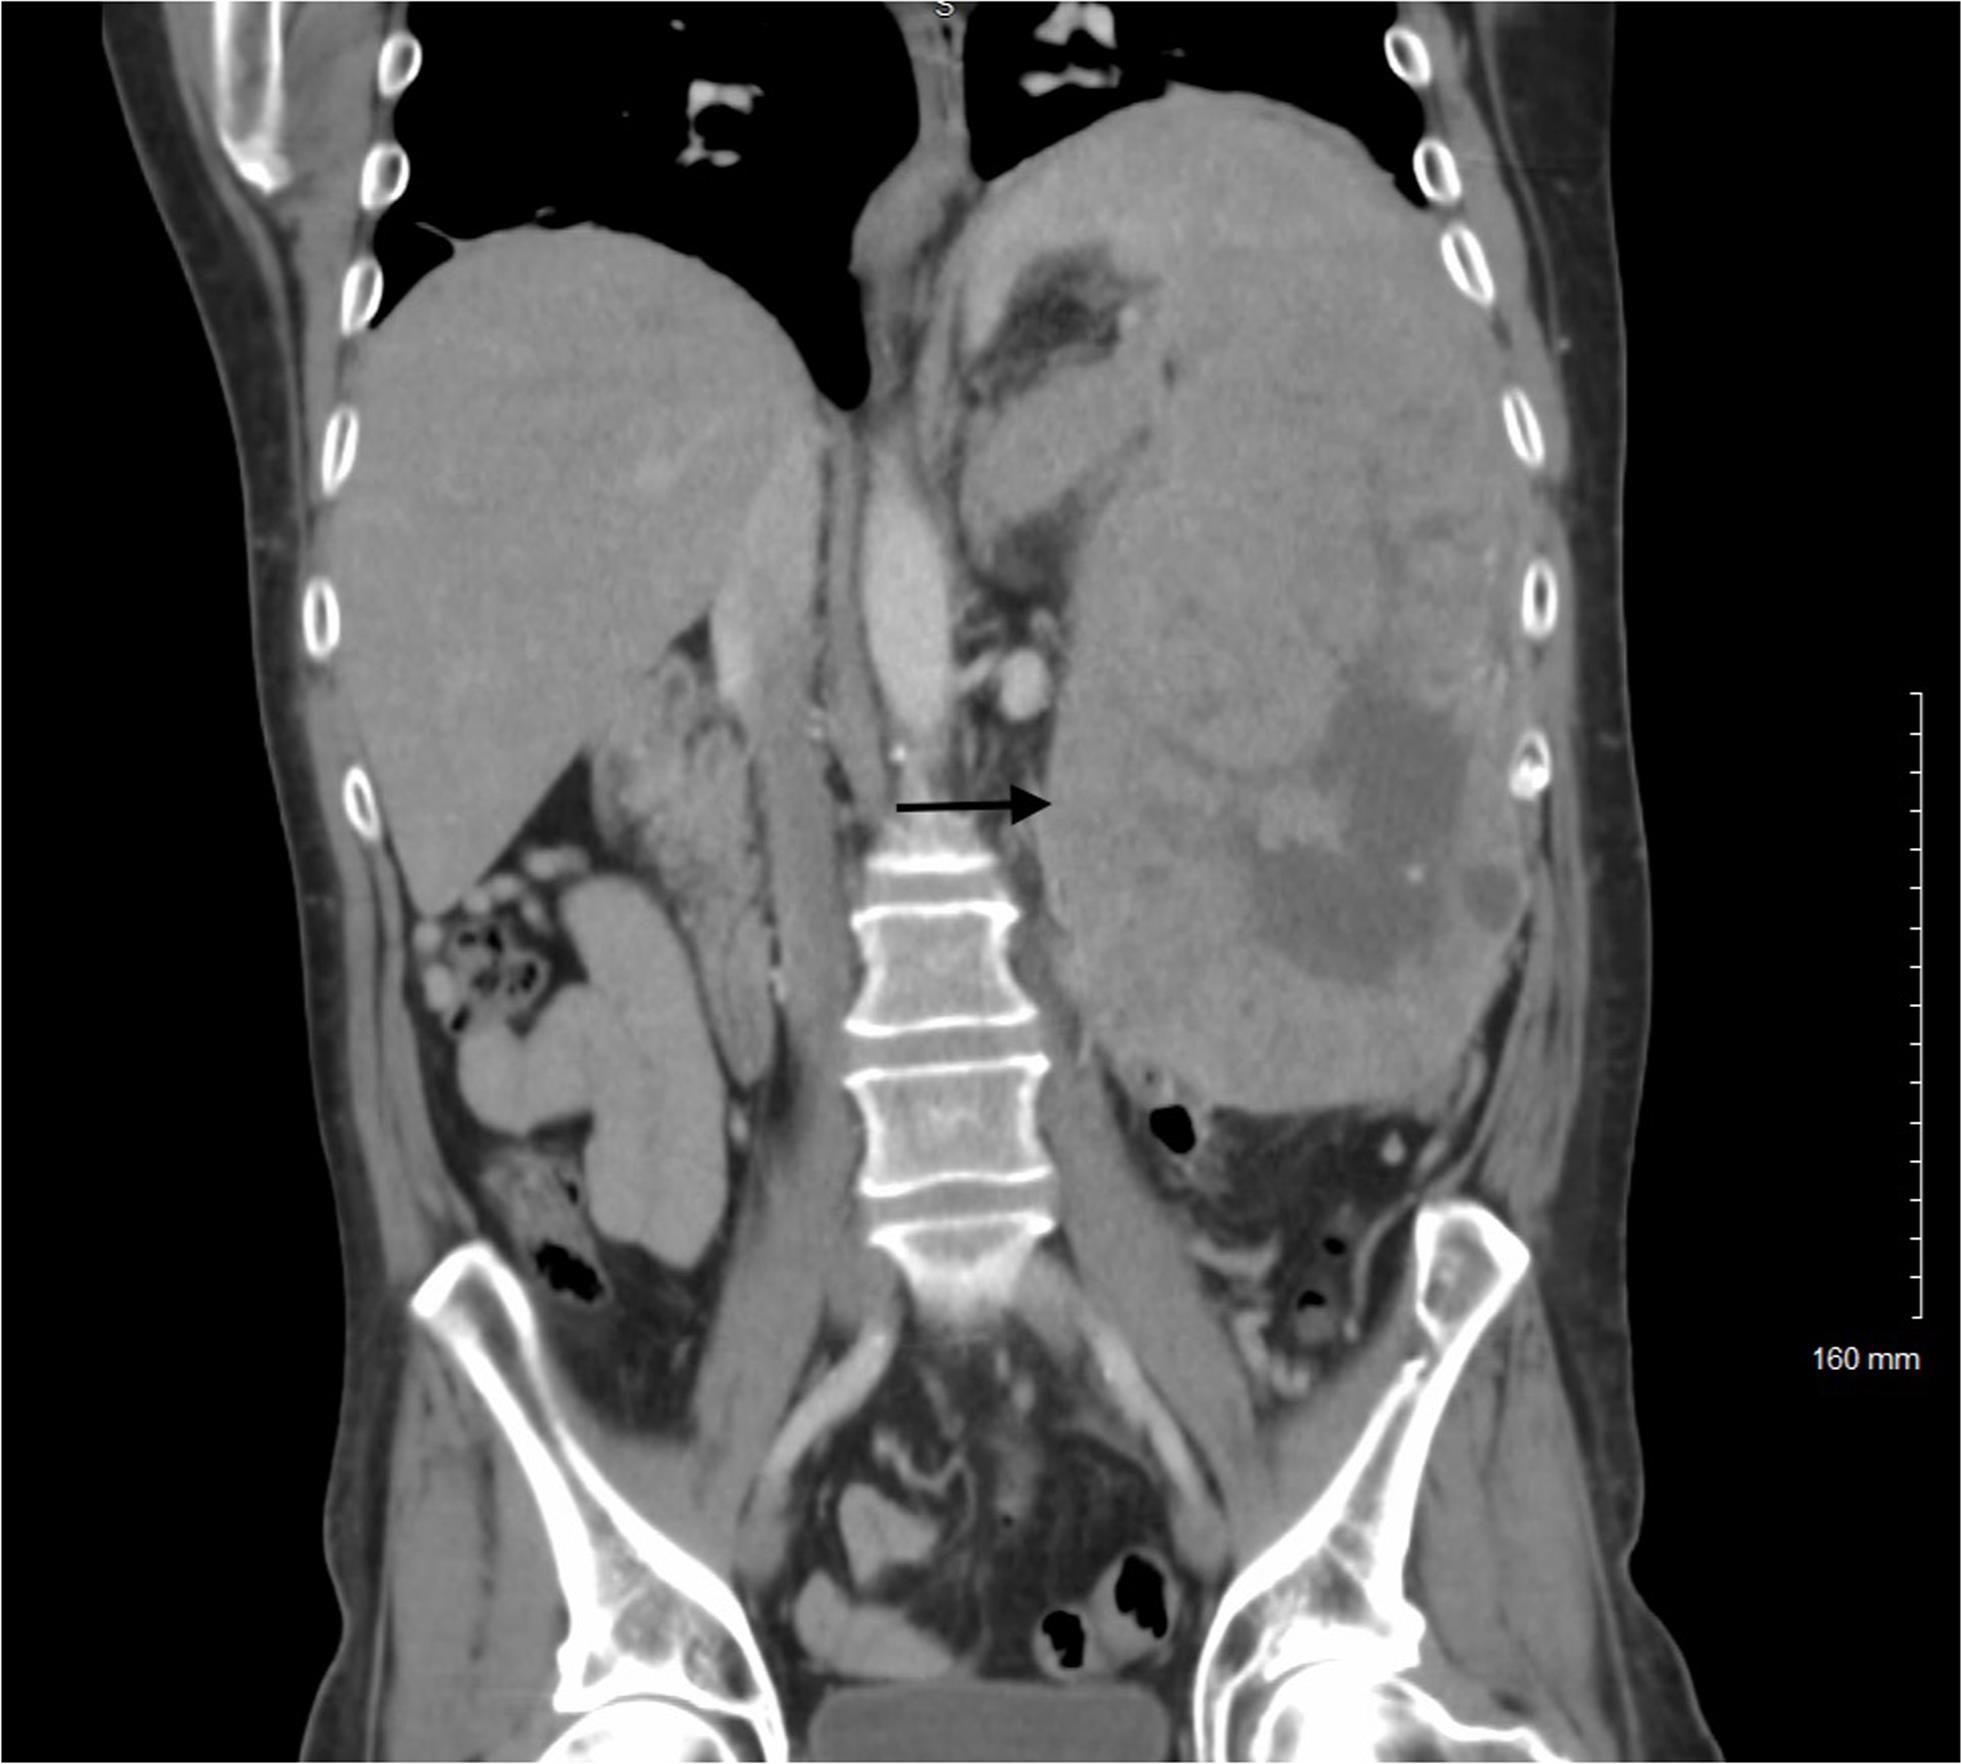 Computed tomography imaging demonstrated a 22-centimeter, heterogeneous splenic mass with central necrosis.